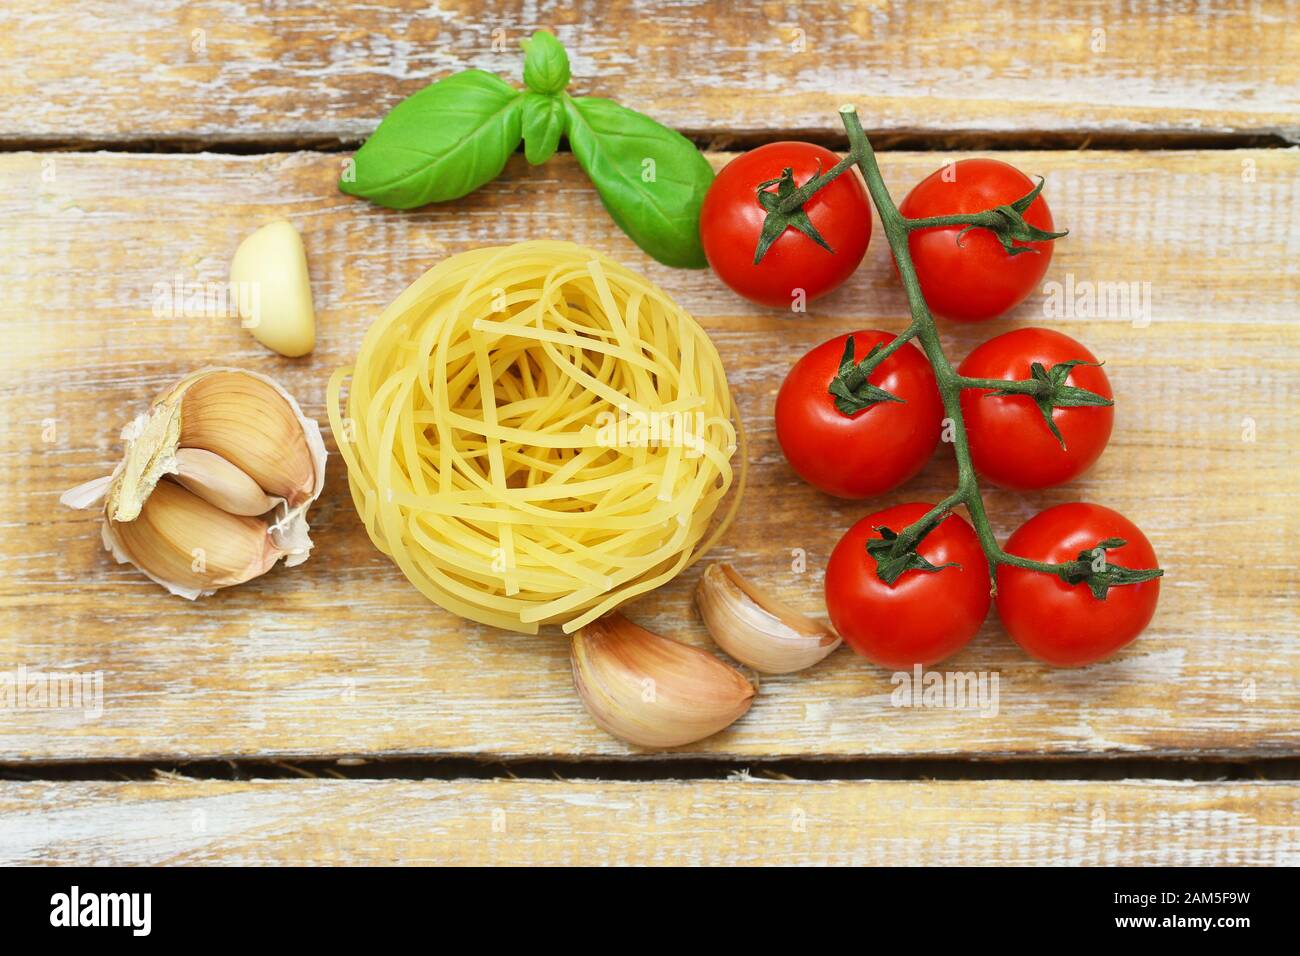 Ingredients for perfect Italian pasta: tagliatelle, ripe cherry tomatoes on stem, garlic cloves and fresh basil leaves on rustic wooden surface Stock Photo